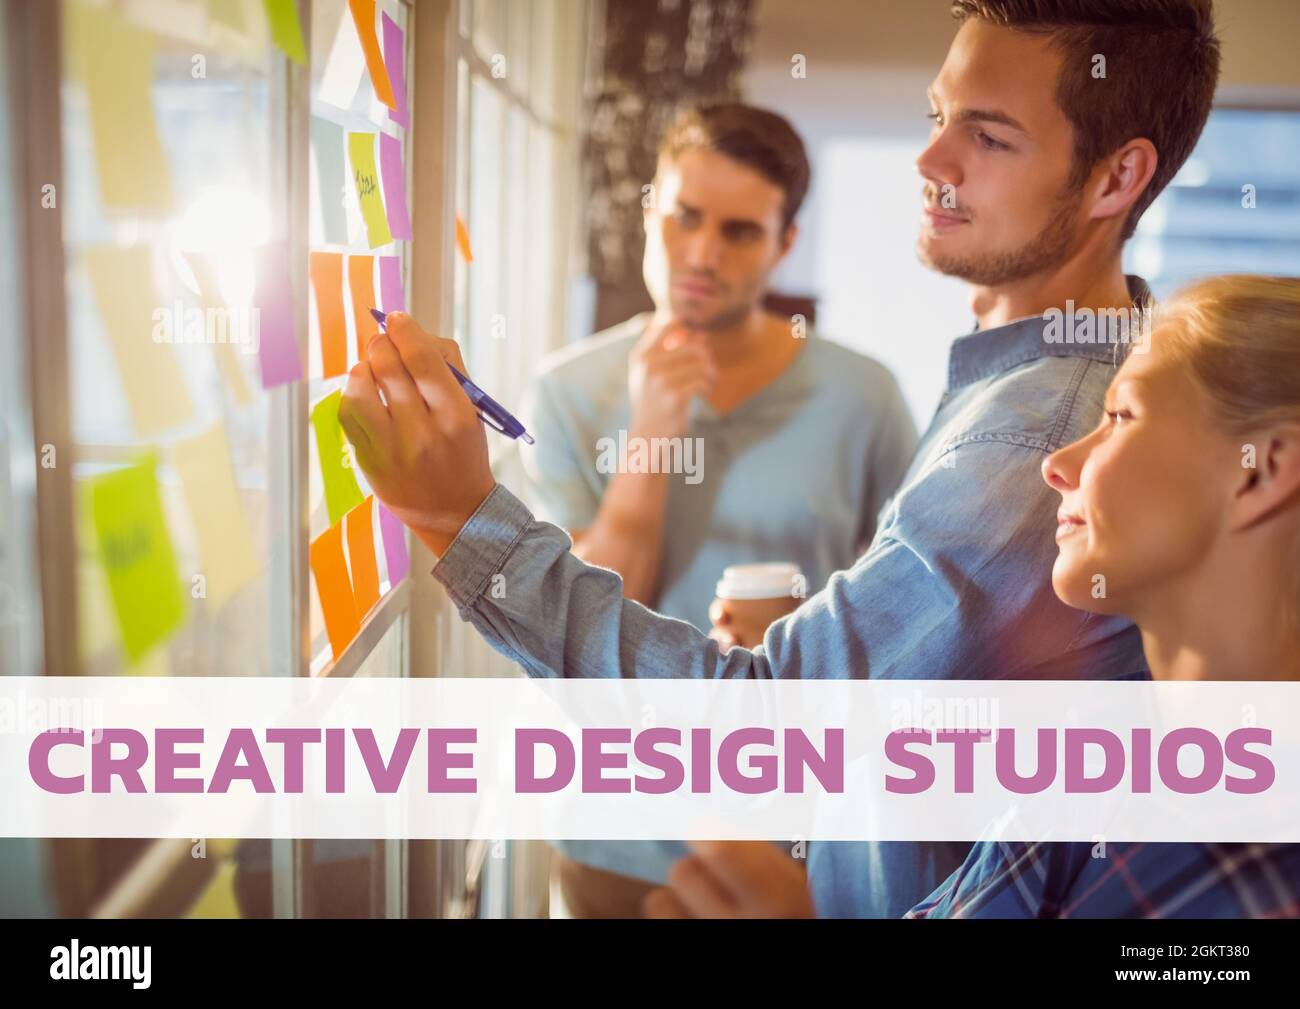 Creative design studios text banner against office colleagues writing on memo notes at office Stock Photo